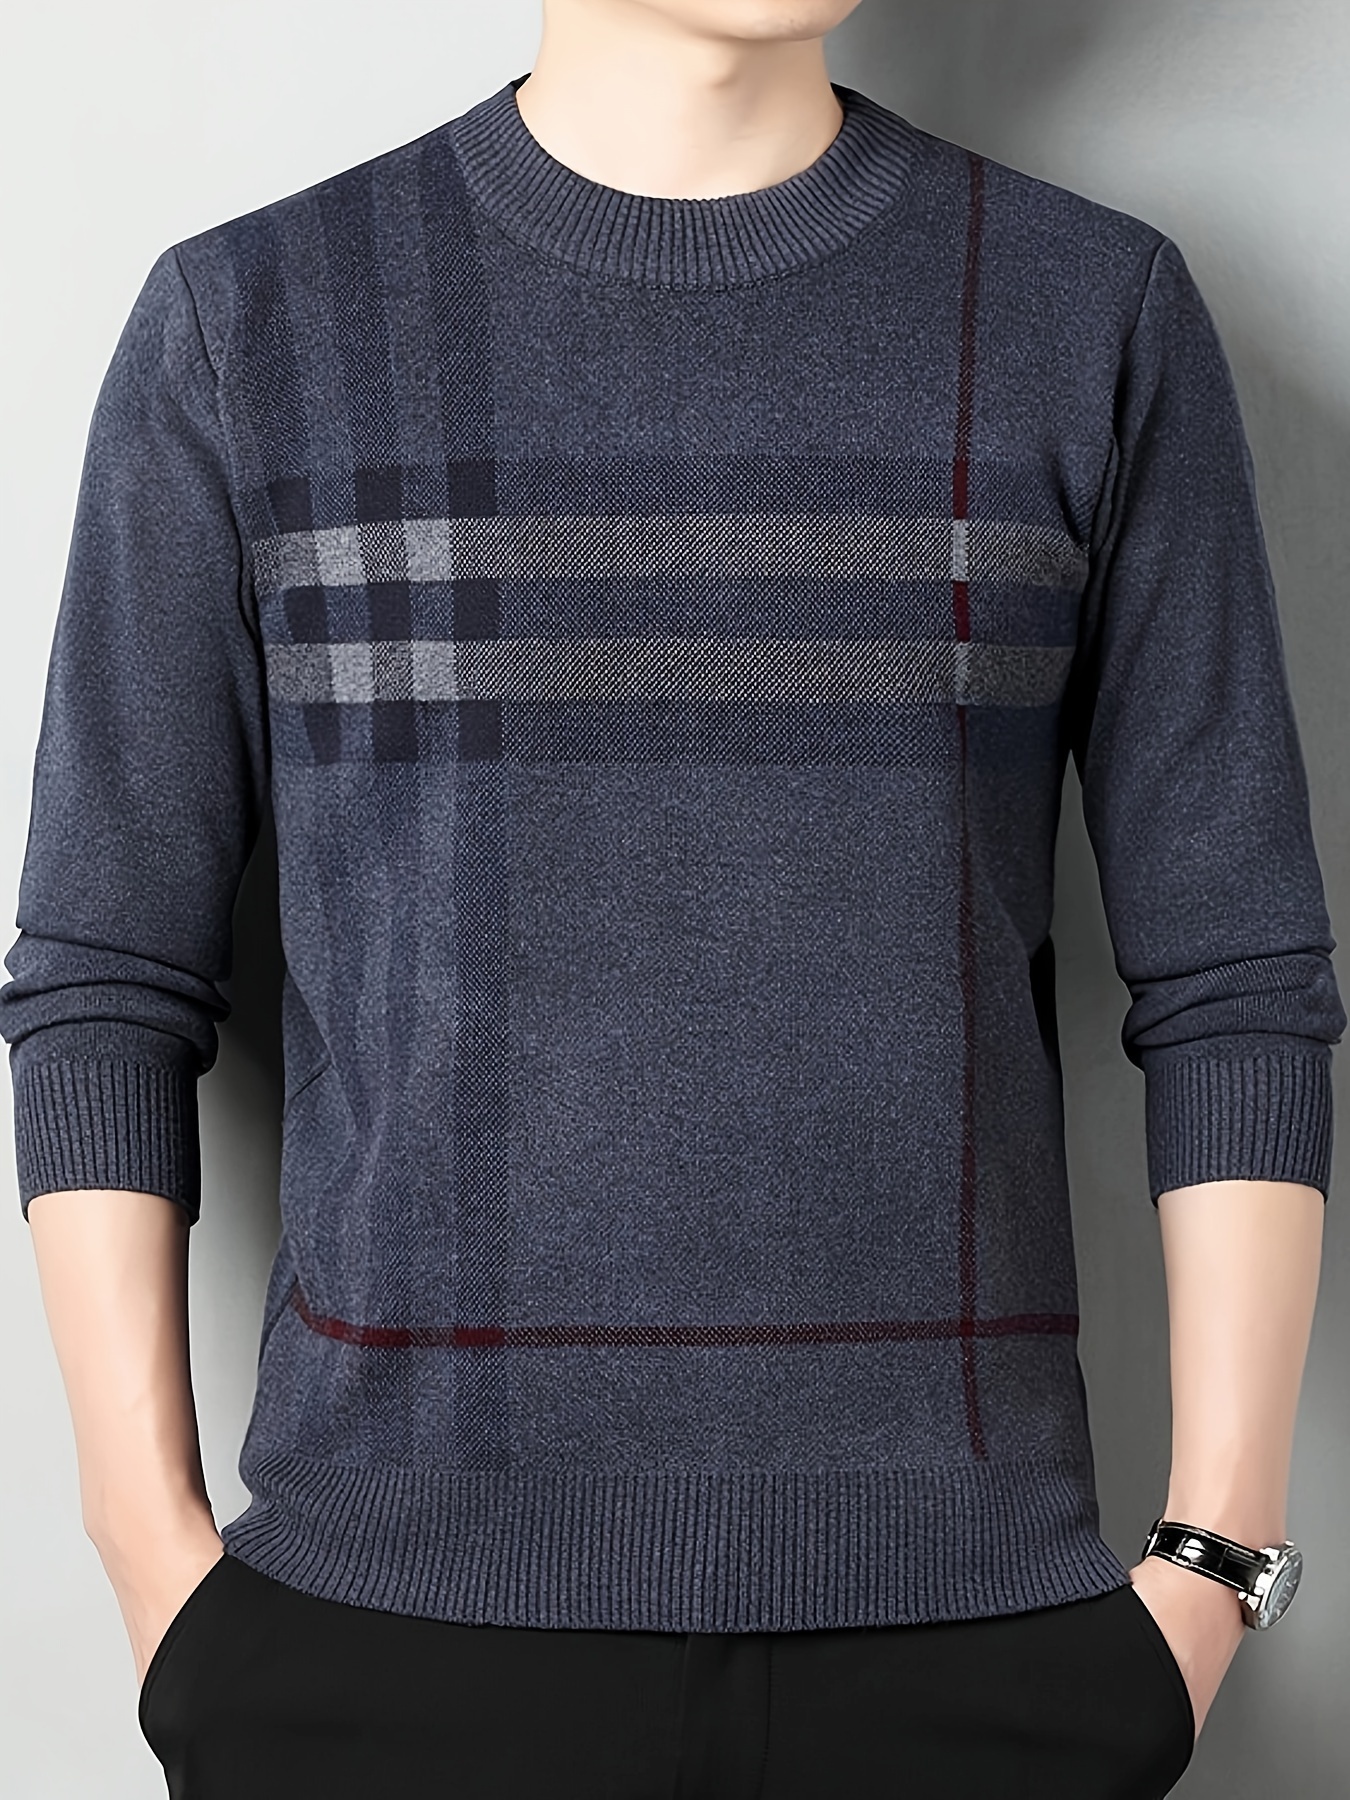 Men's Stylish Loose Knitted Sweater, Casual Slightly Stretch